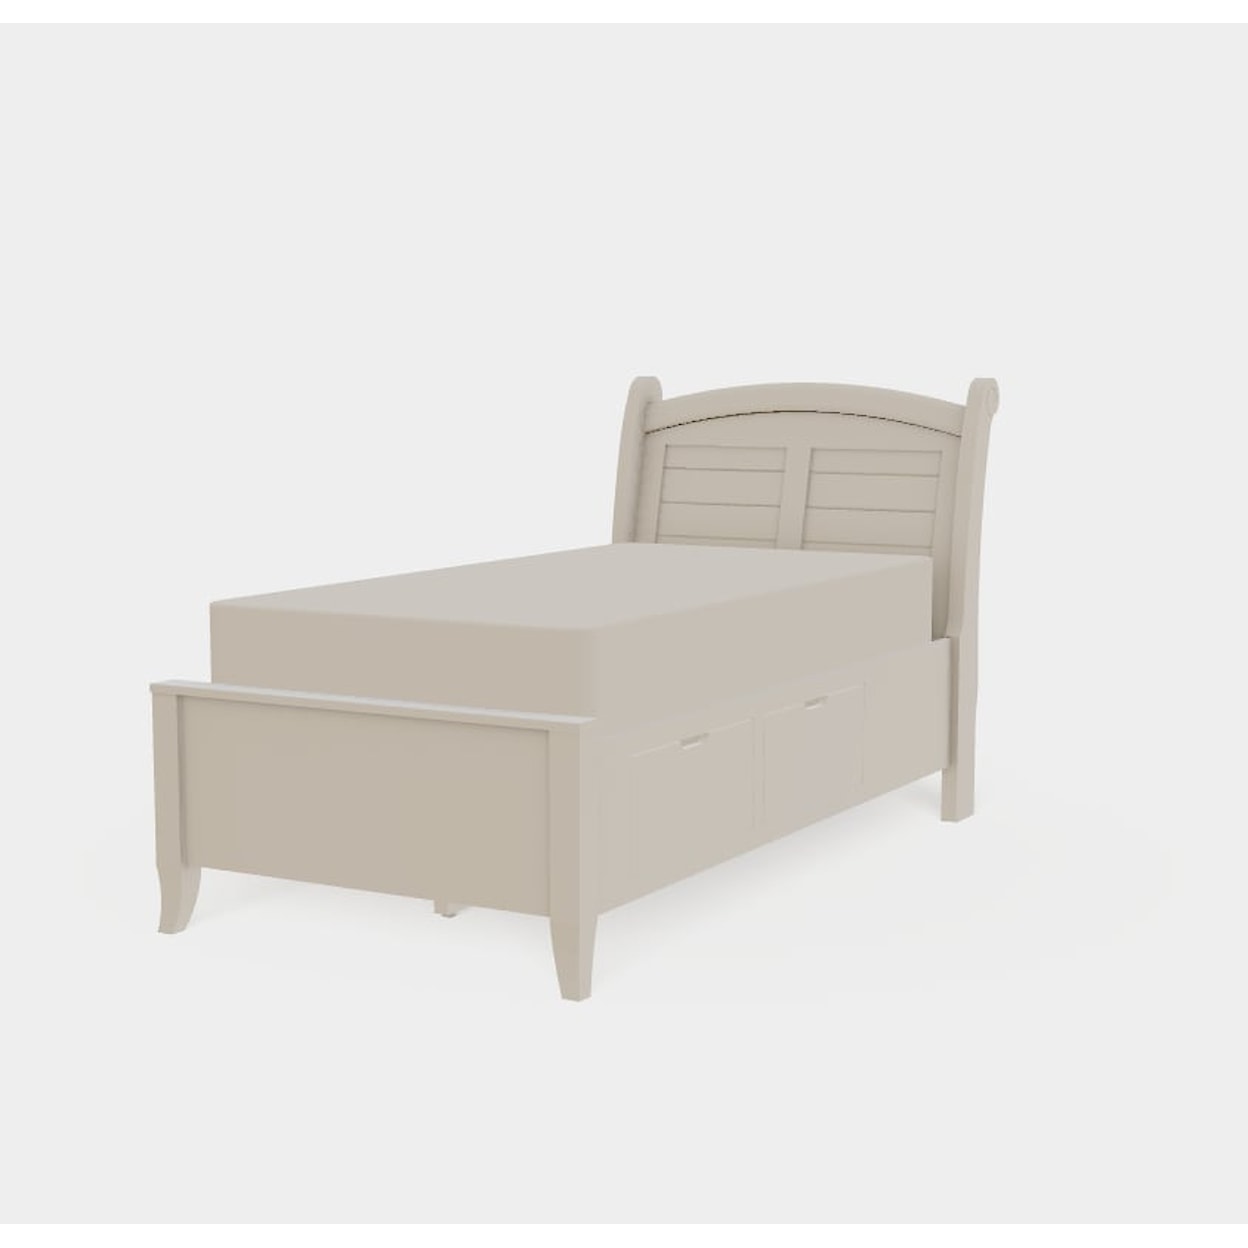 Mavin Tribeca Twin XL Arched Right Drawerside Bed